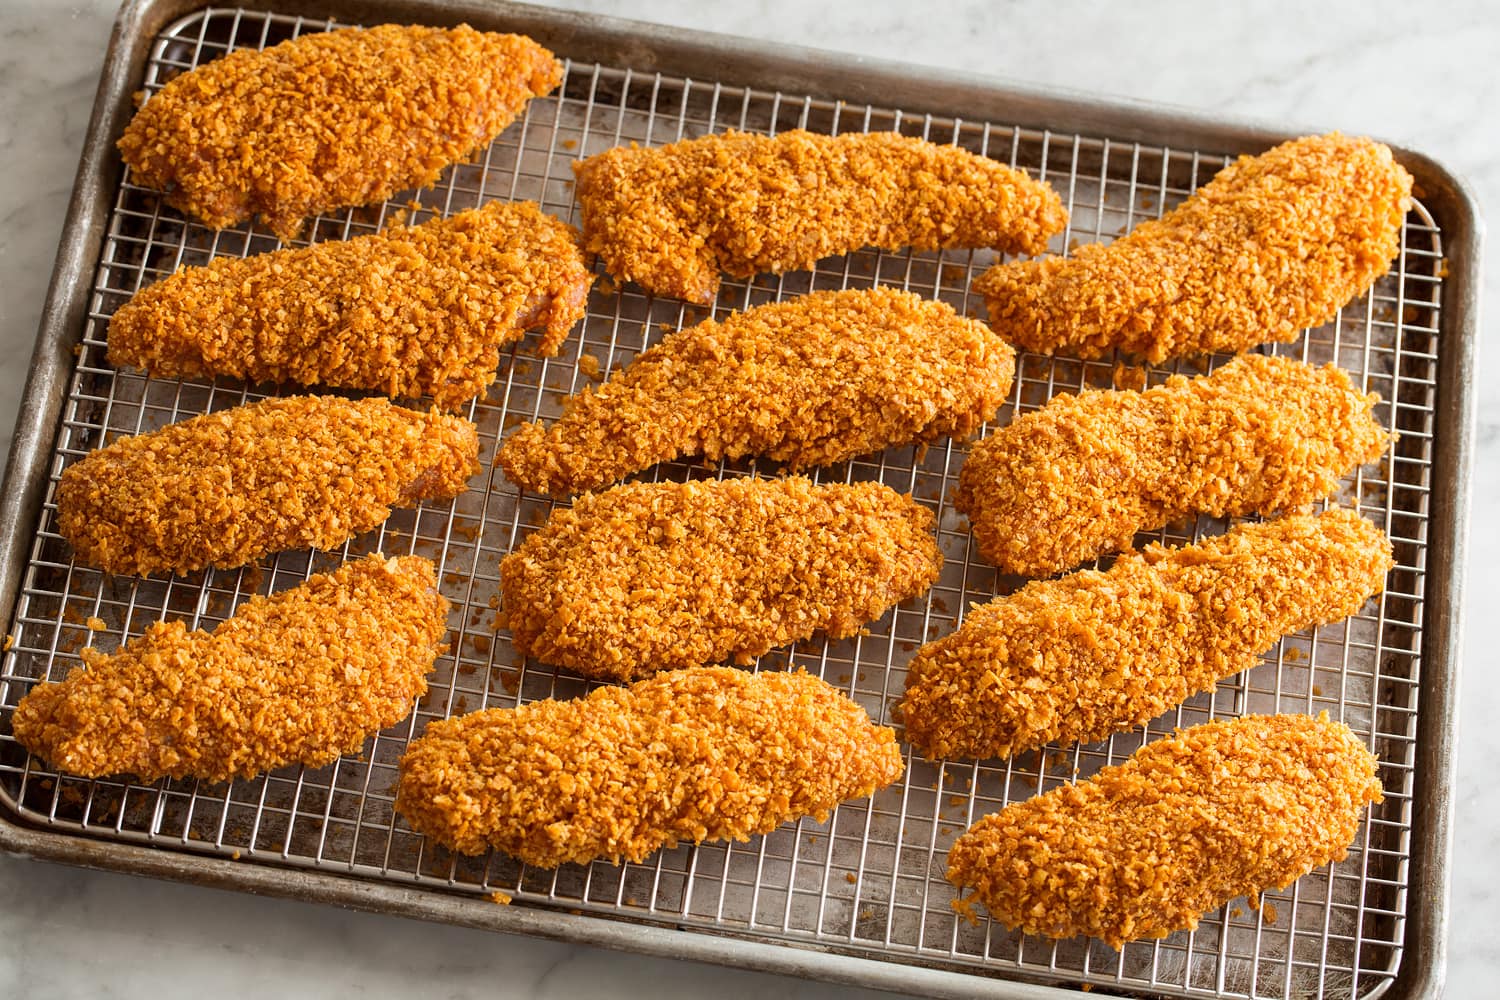 Chicken strips shown on a wire rack and baking sheet before baking.